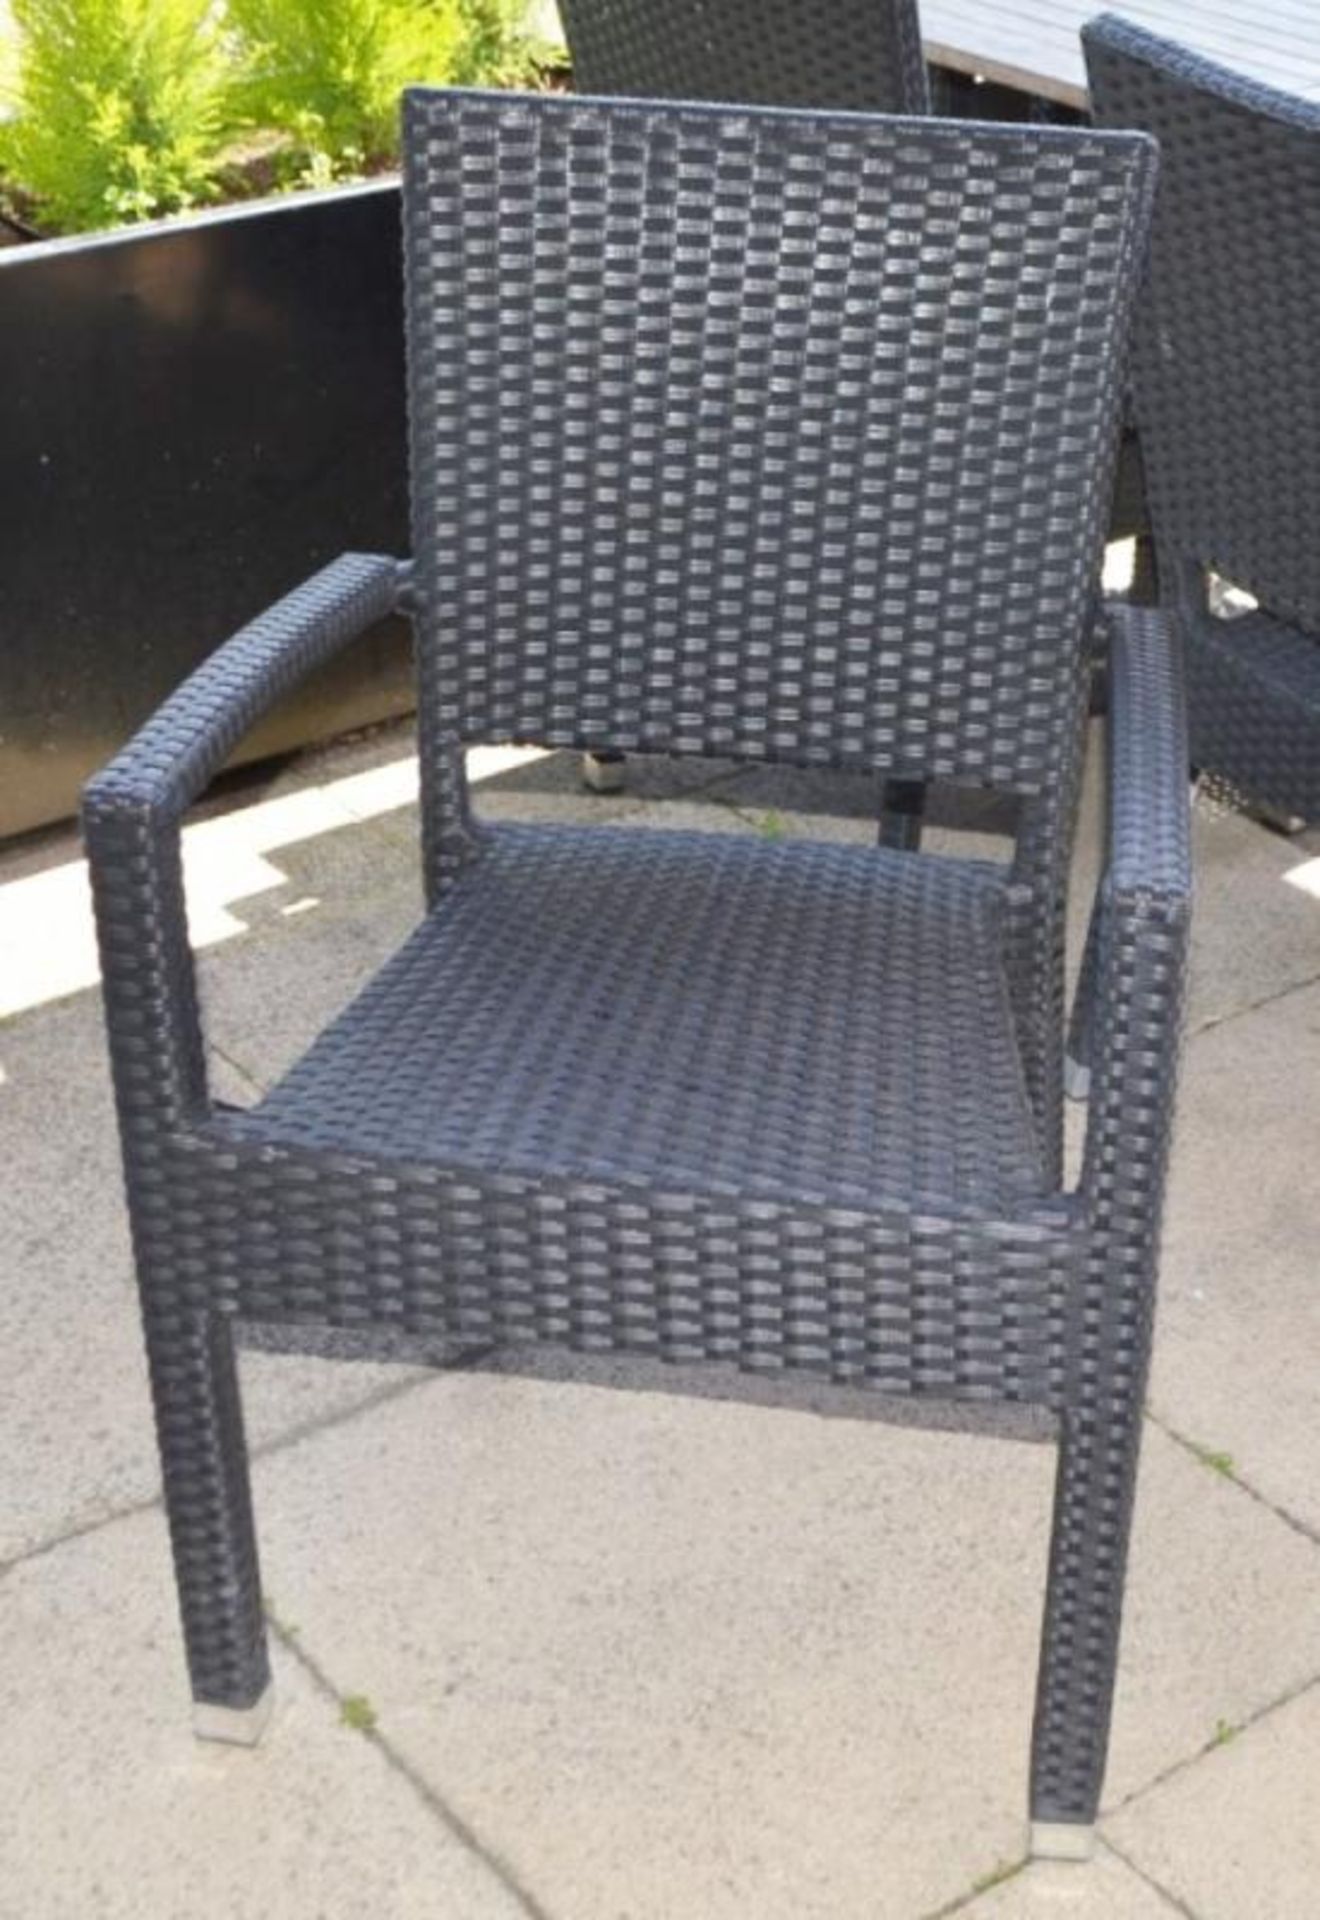 8 x Ratten Garden Bistro Chairs With Charcoal Finish and Armrests - CL390 - Location: Sheffield - Image 2 of 5